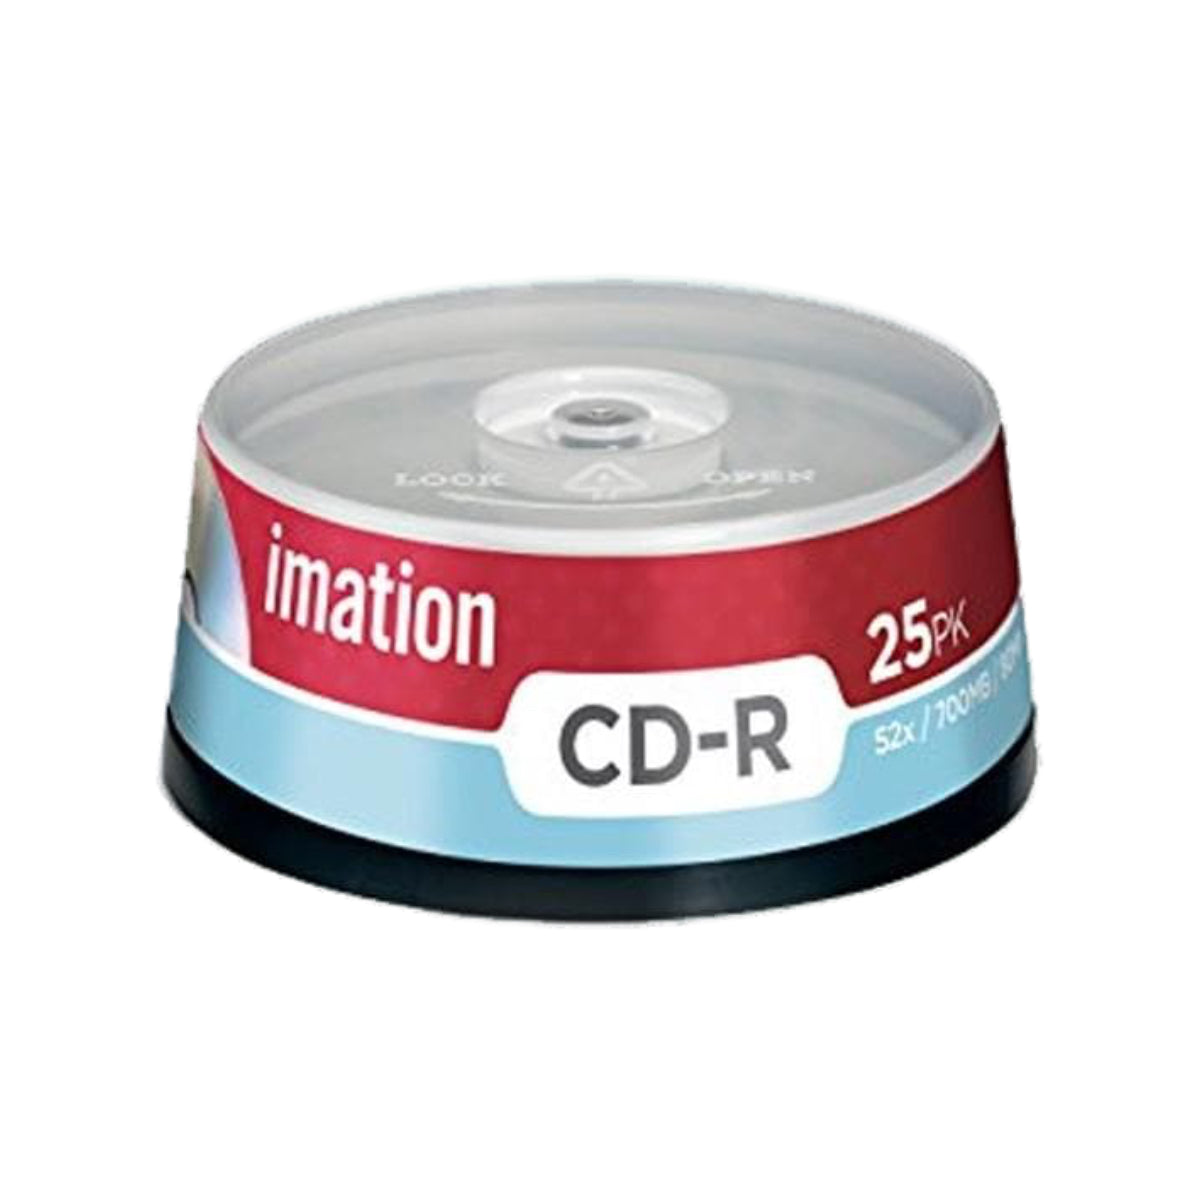 Imation CD-R, 52x / 700MB / 80Min, 25/spindle